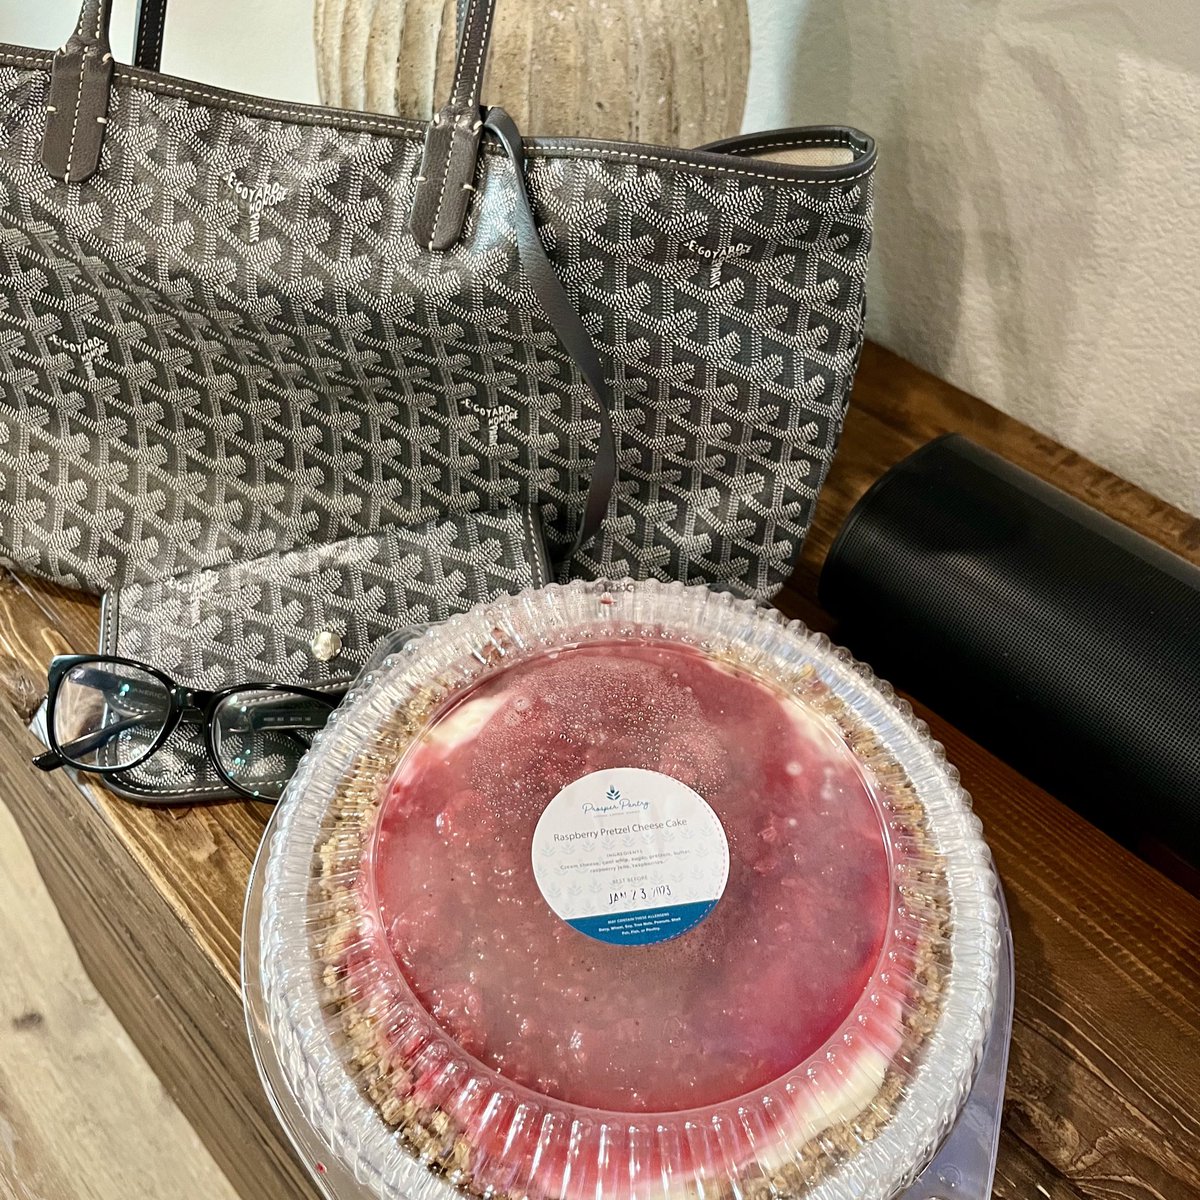 What I’m bringing to tonight’s potluck : 
Raspberry Pretzel Cheese Cake that I bought from Prosper Pantry 😋 #SpecialNeedsMom #JanuaryMeetUp #FridayFeeling